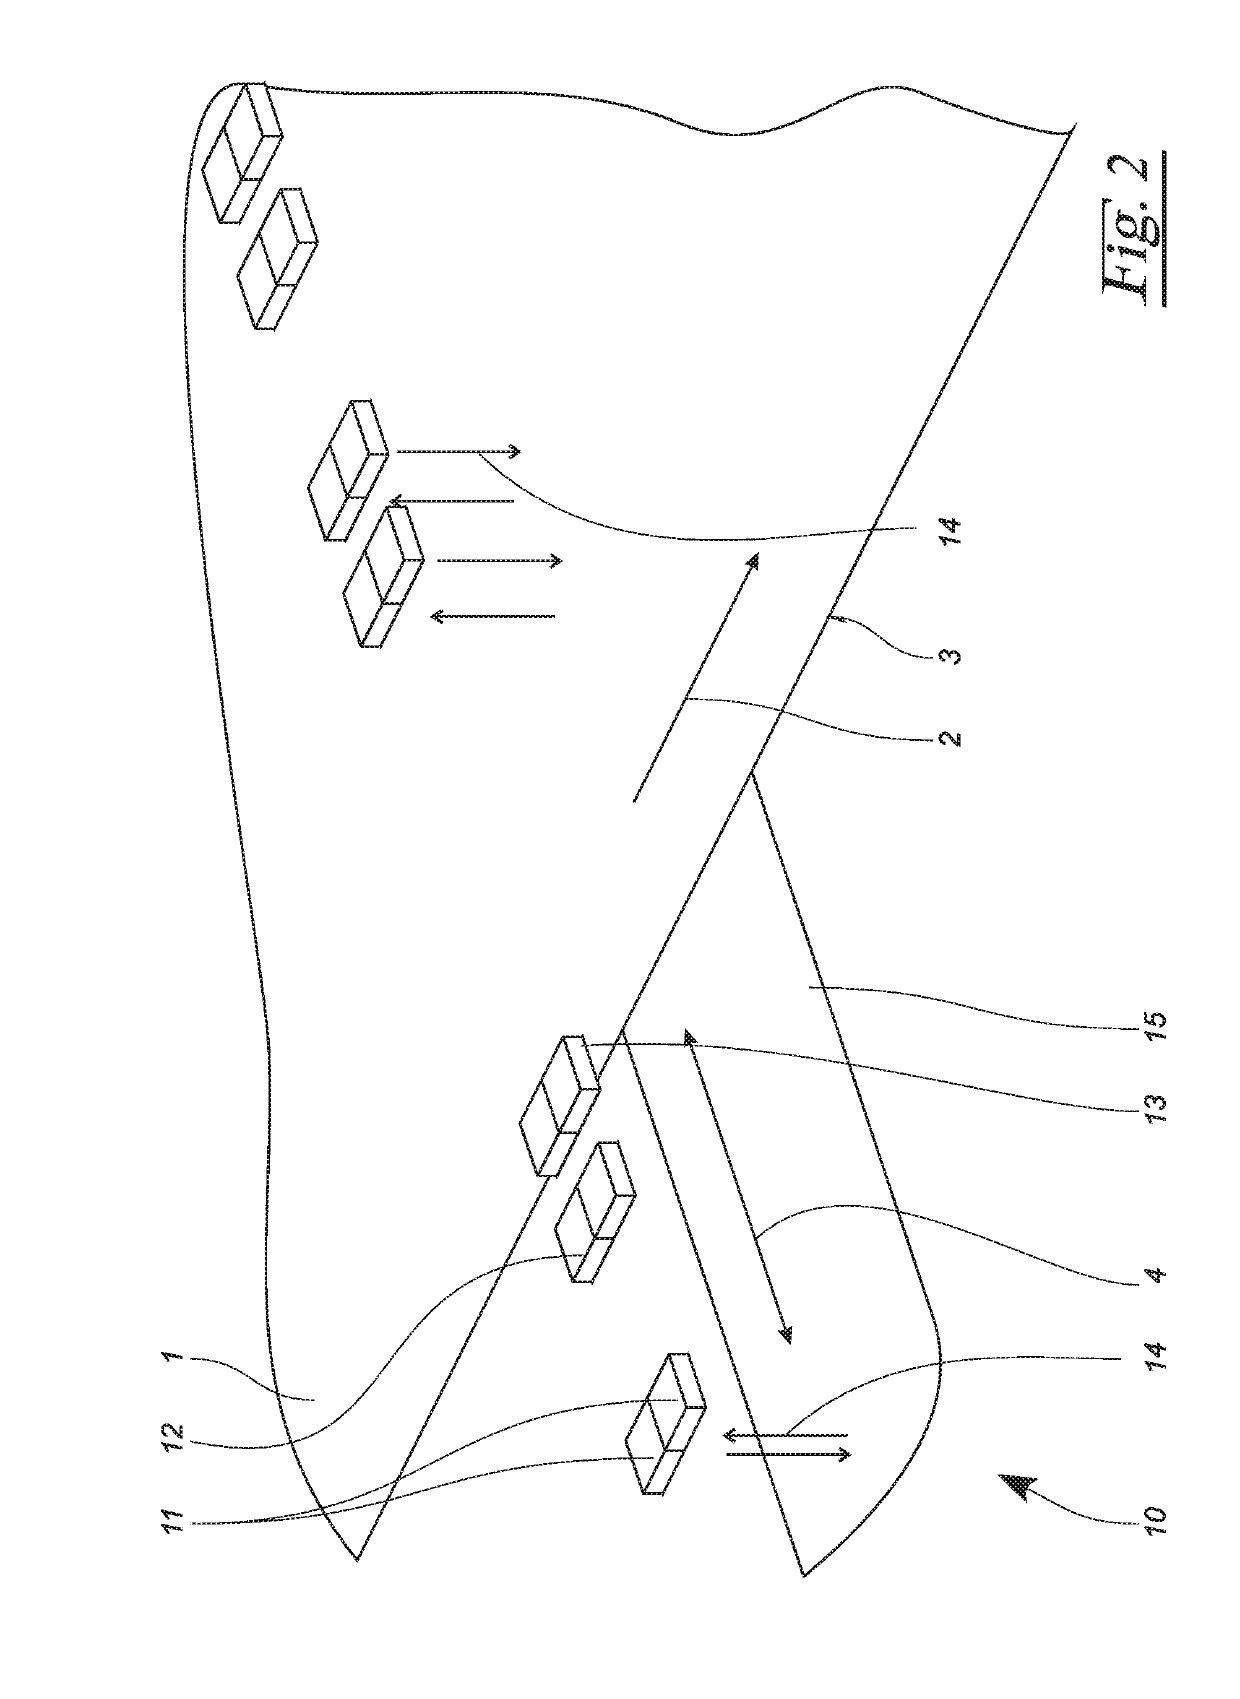 Sensor for Detecting at Least One Edge of a Running Product Web